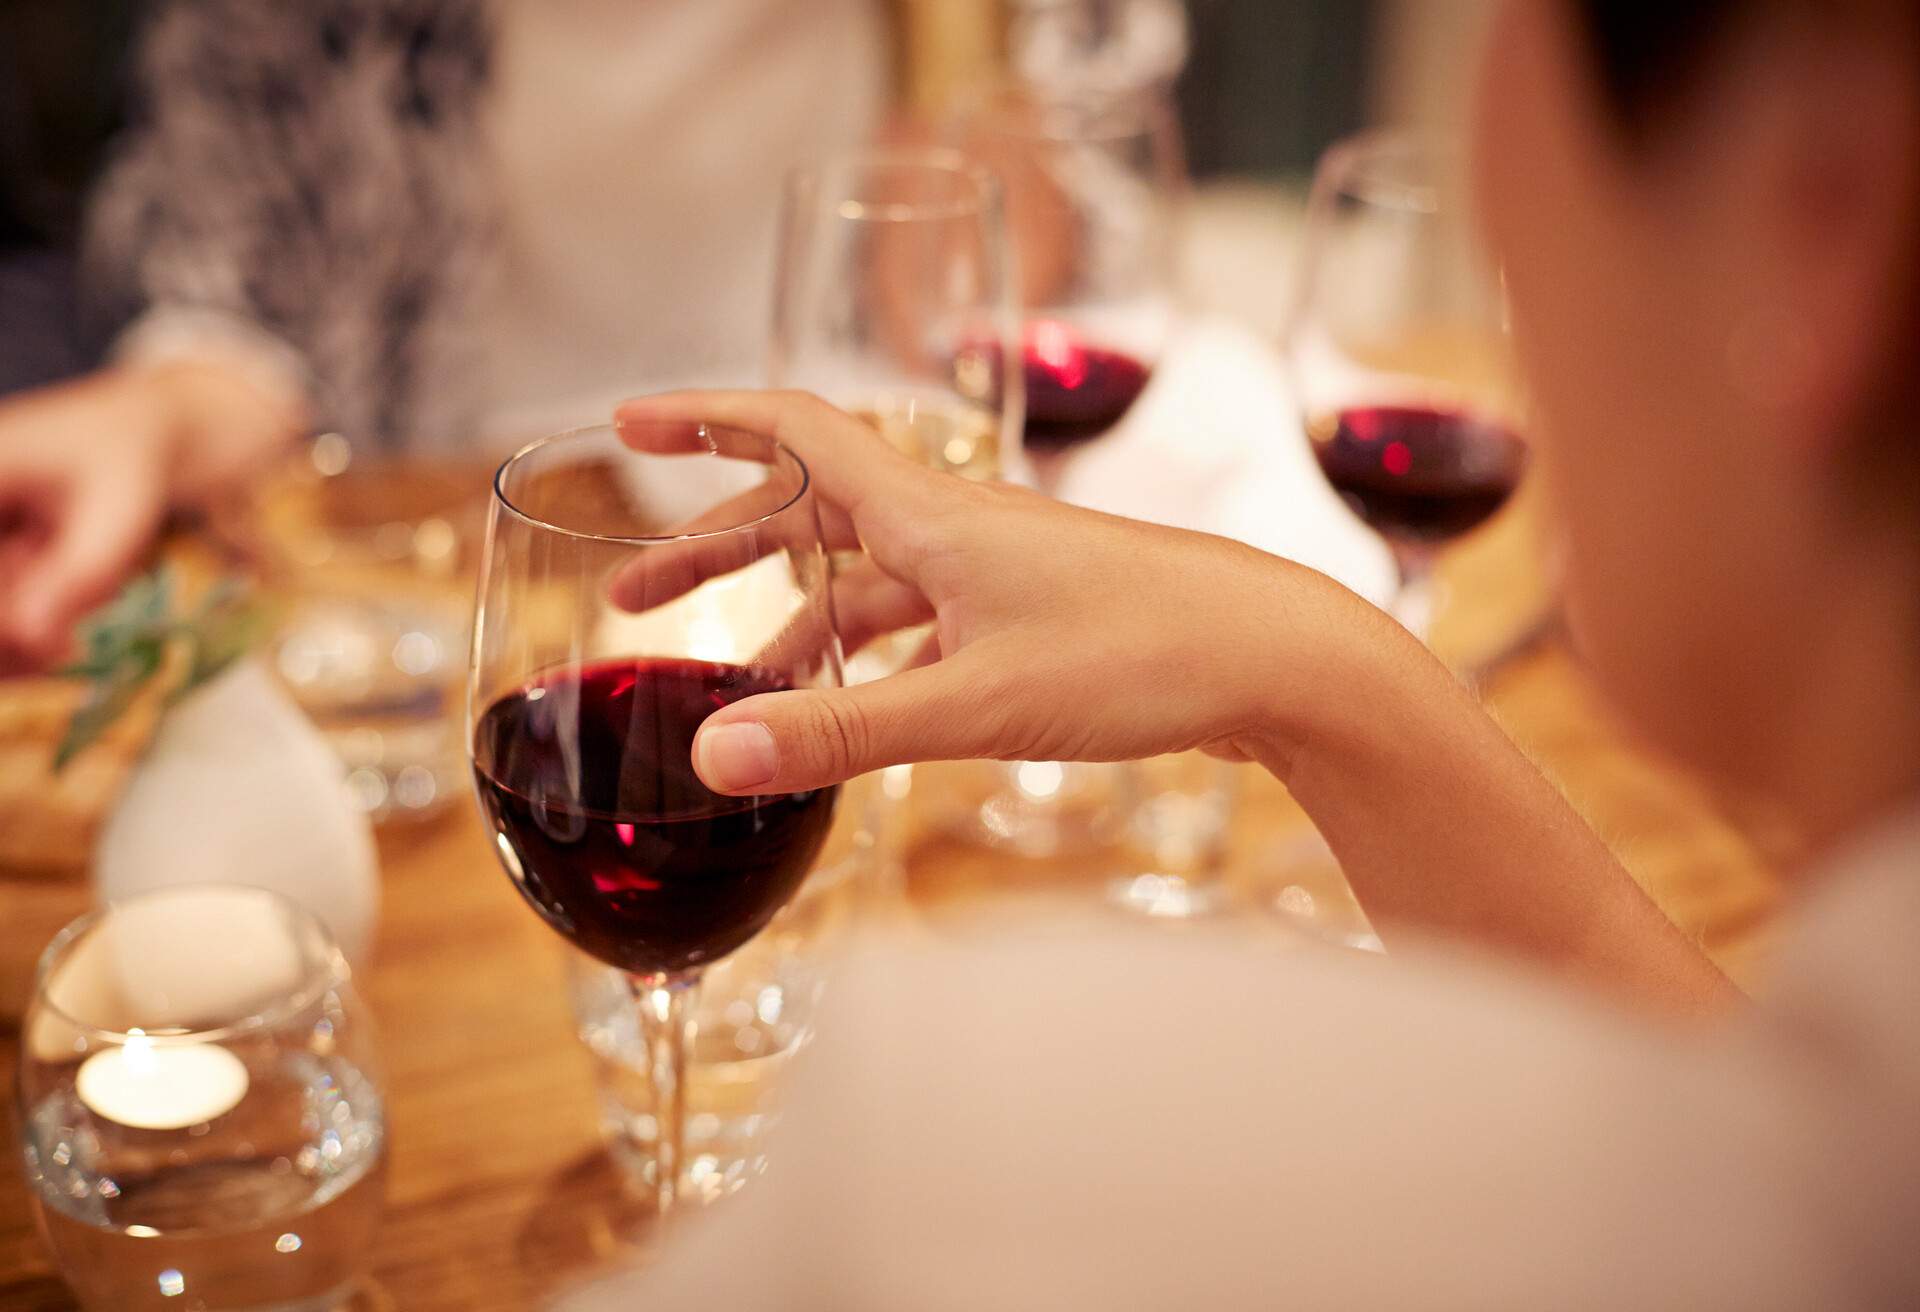 A person holds a wine glass while others rest on a table.